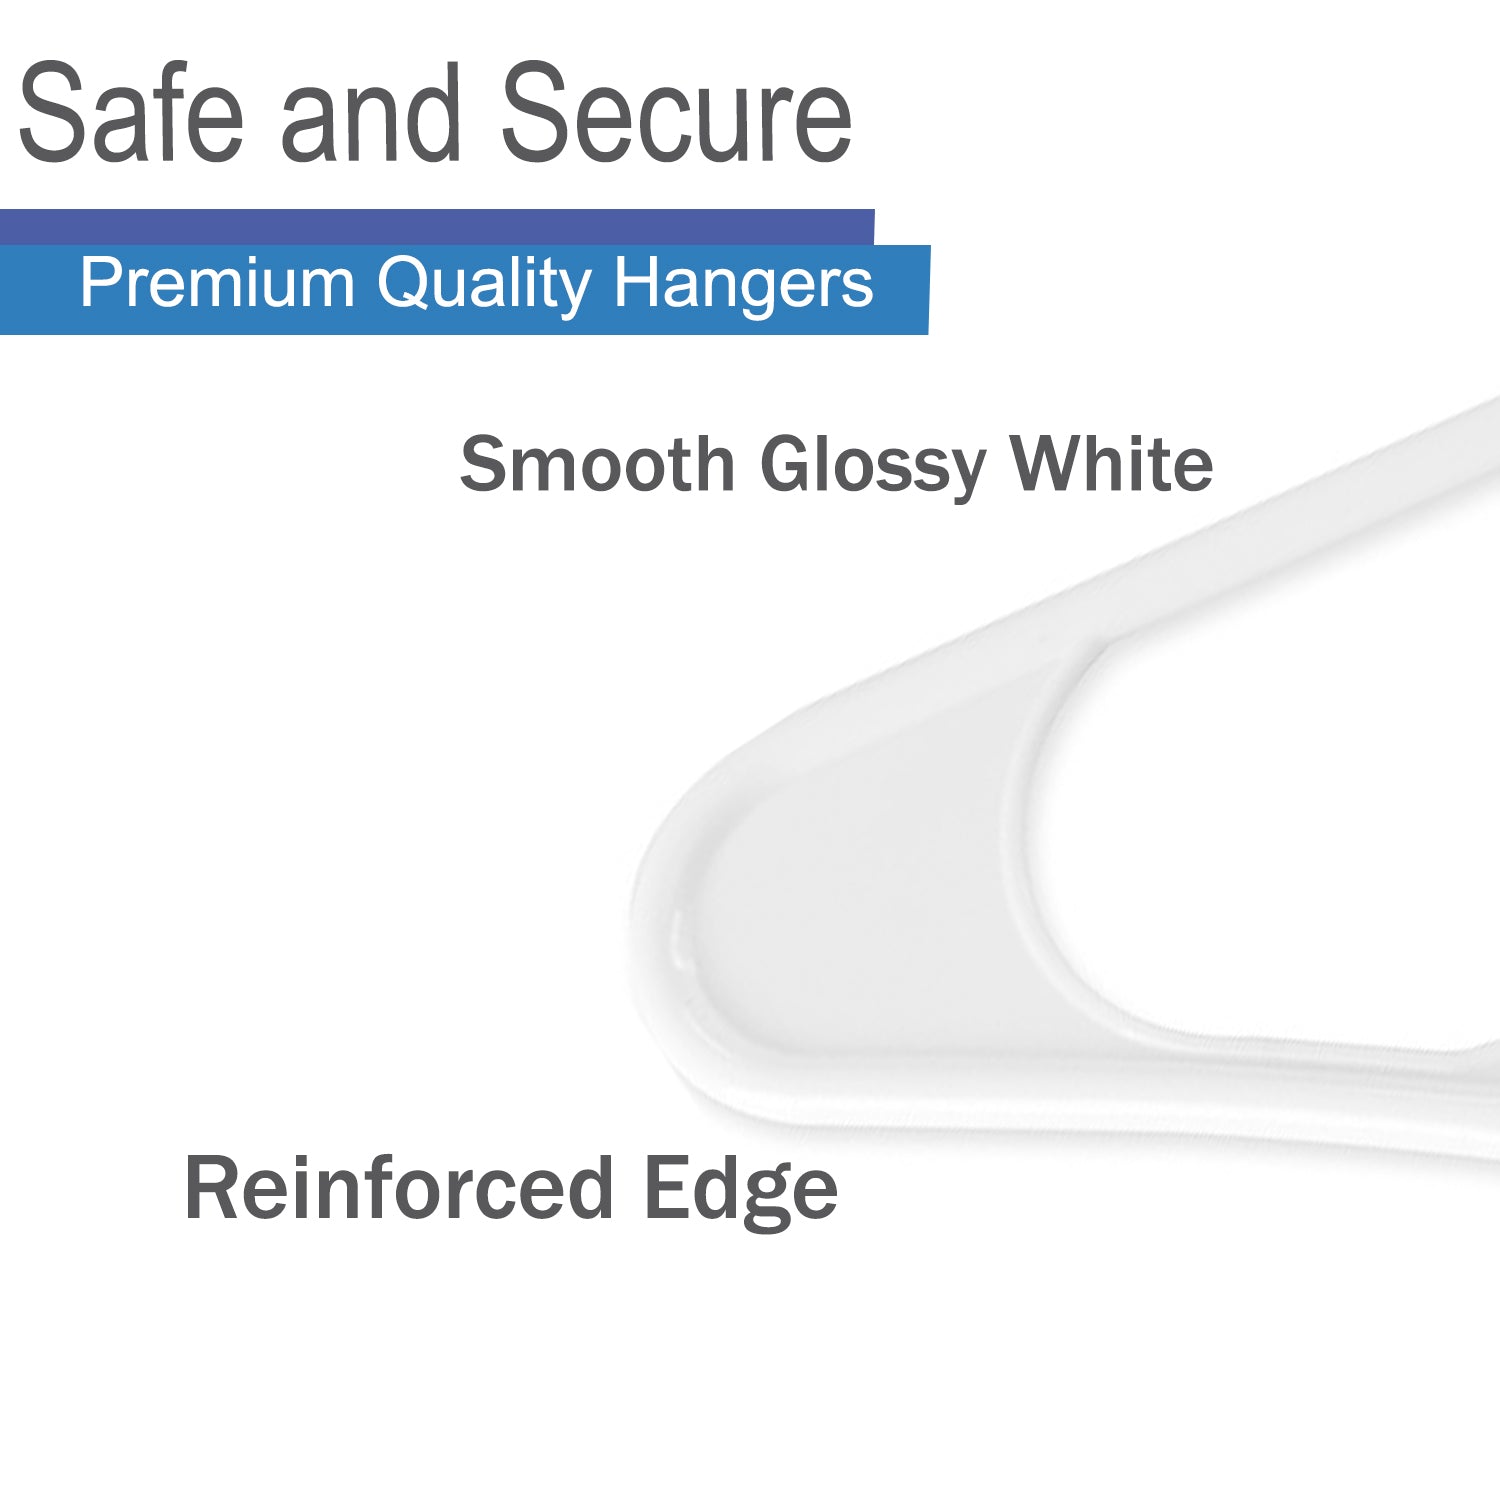 our goods Notched Plastic Hangers - White - Shop Hangers at H-E-B